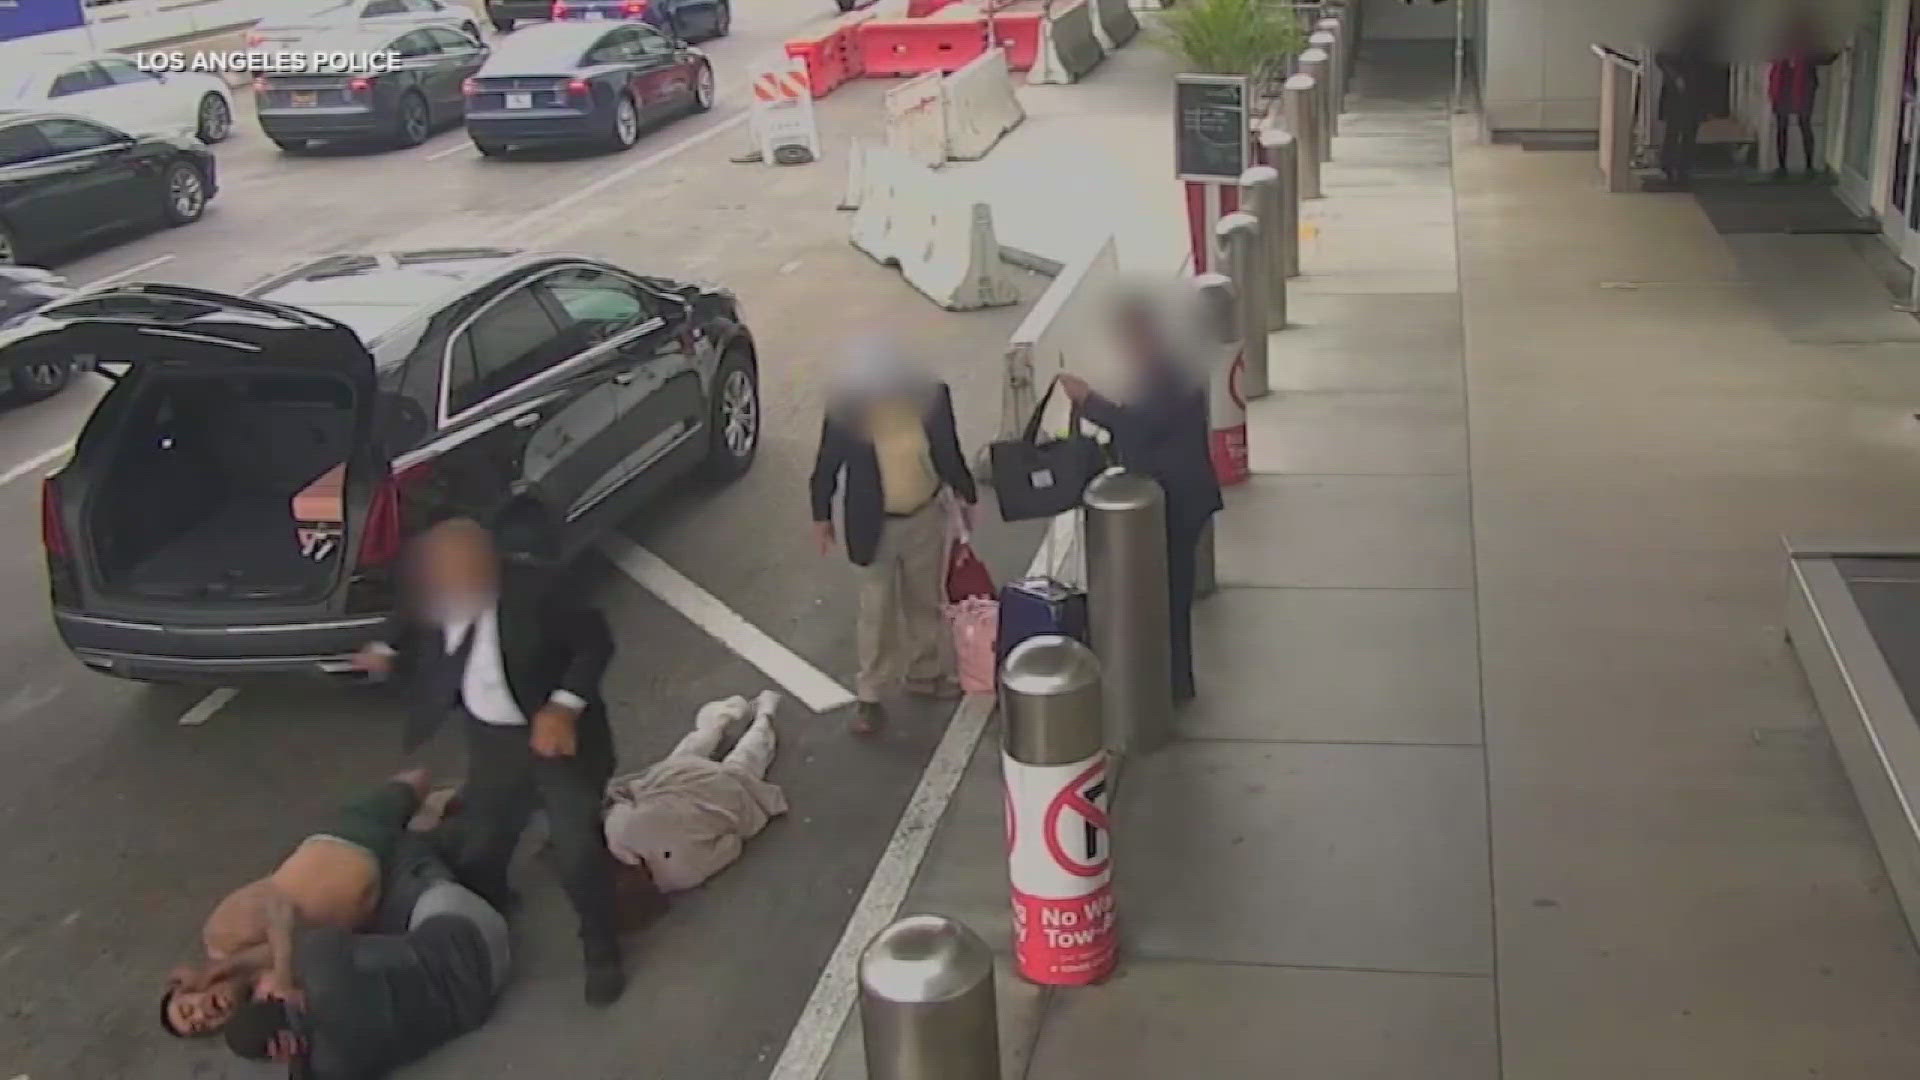 A woman was knocked out in May after two men were fighting at LAX.